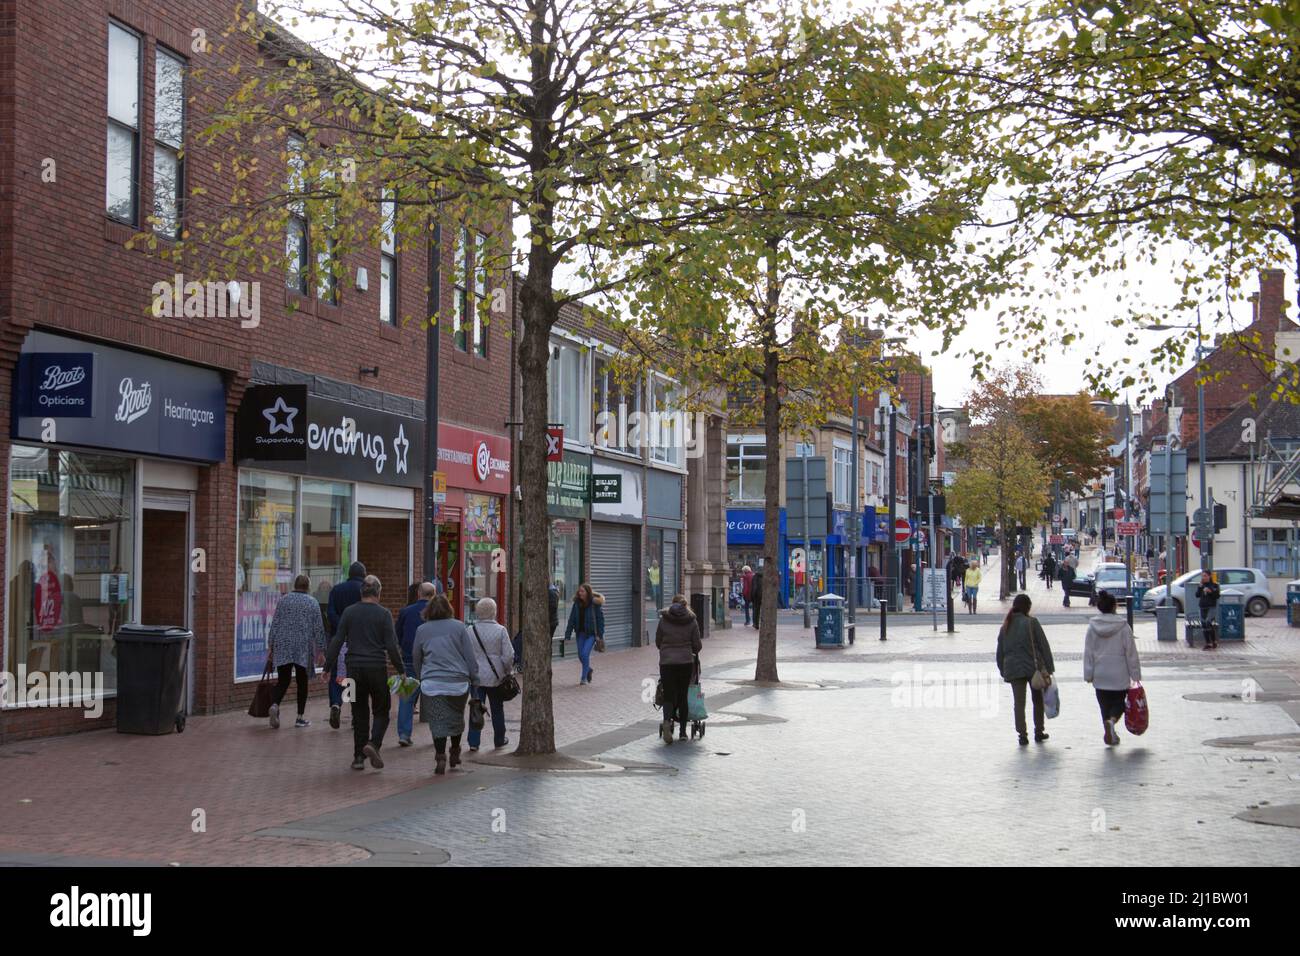 The shopping precinct in Worksop, Nottinghamshire in the UK Stock Photo